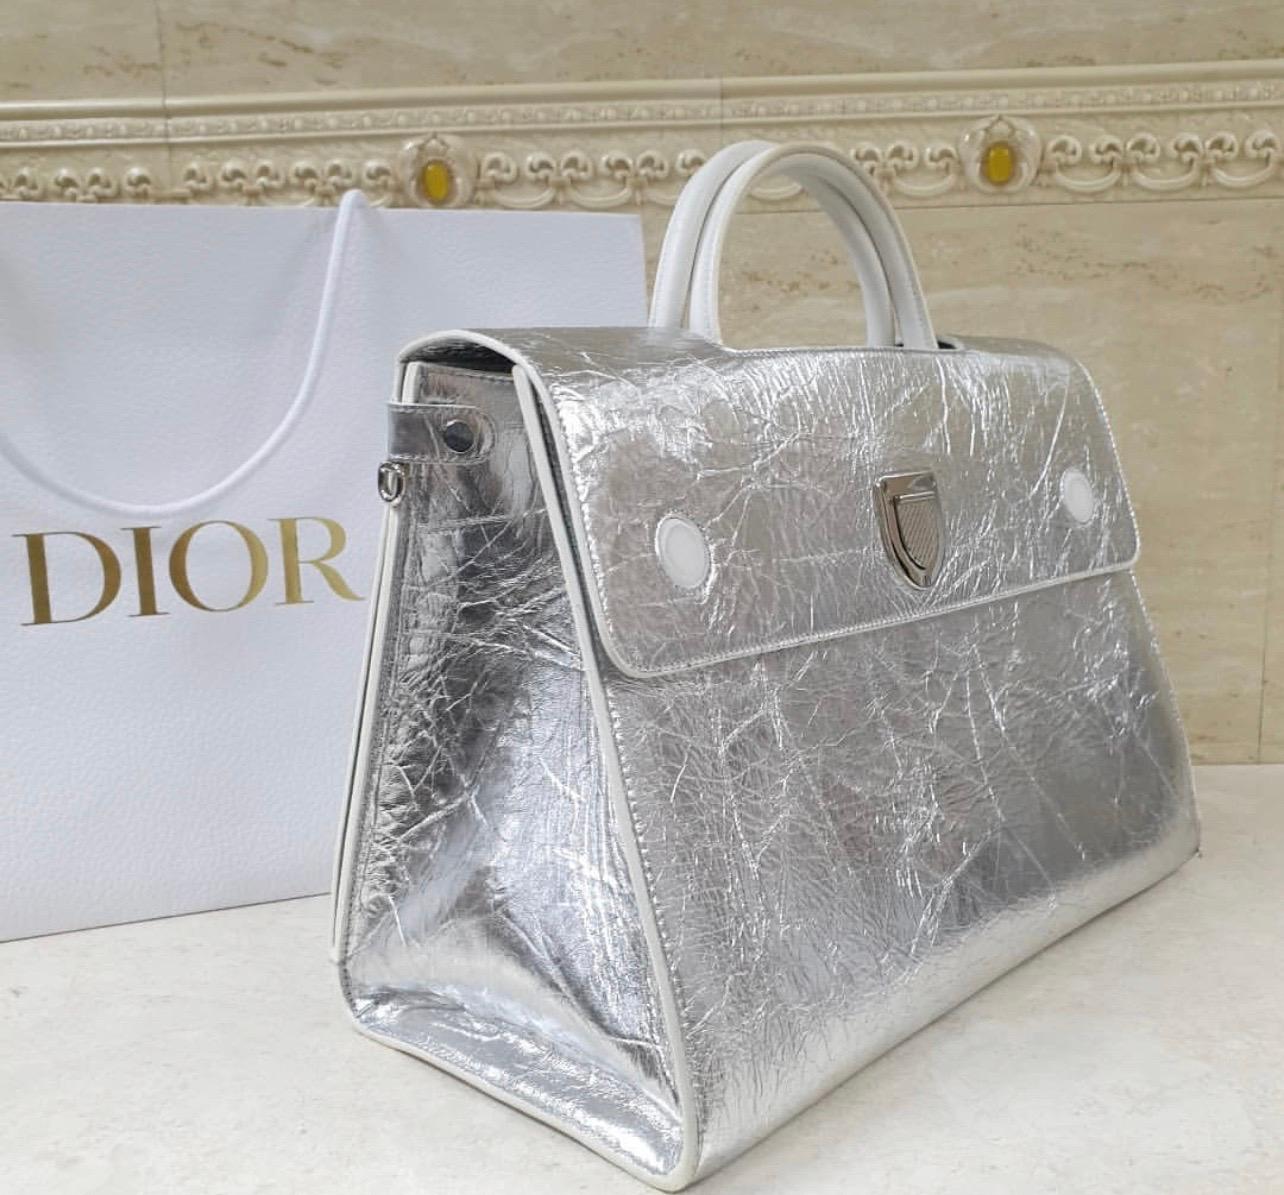 This fashionable bag from Christian Dior is a tote with a sleek and contemporary feel. The bag features a highly structured silhouette and statement hardware. 
The crescent shaped push closure draws the eye and even has the cannage pattern etched in